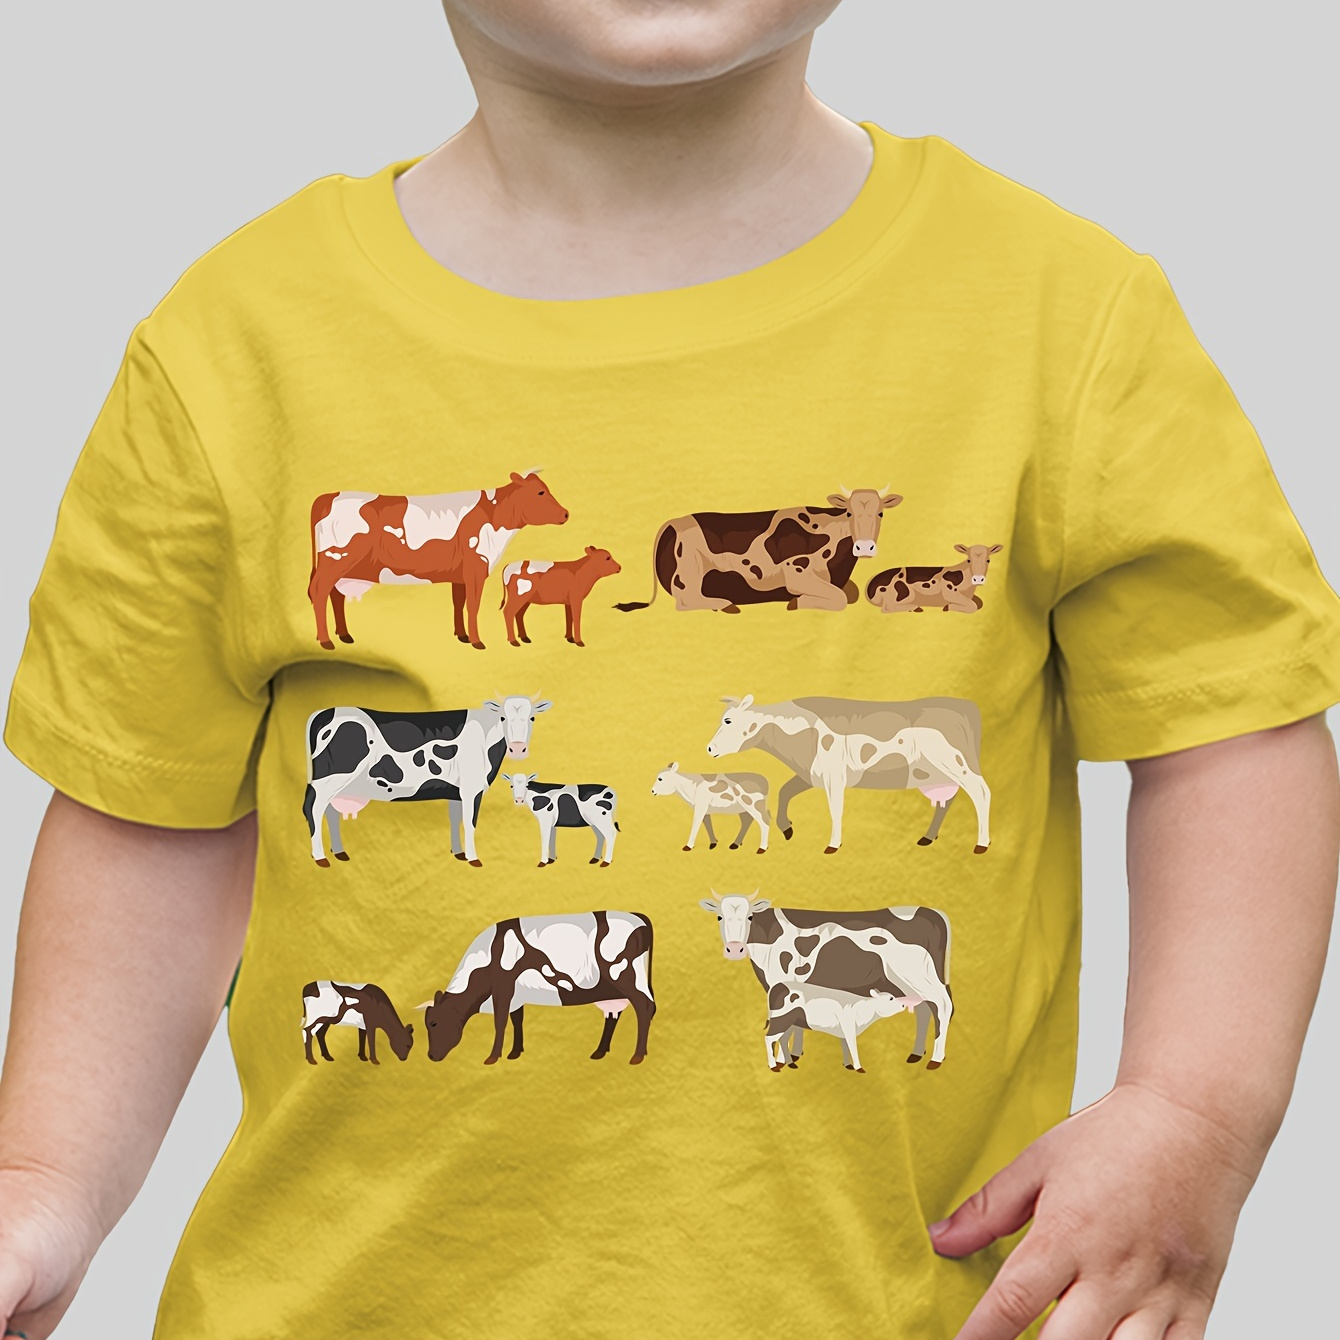 

Cute Cow Milk Cows Print Casual Short Sleeve T-shirt For Boys, Cool Comfy Lightweight Versatile Tee Top, Boys Summer Outfits Clothes